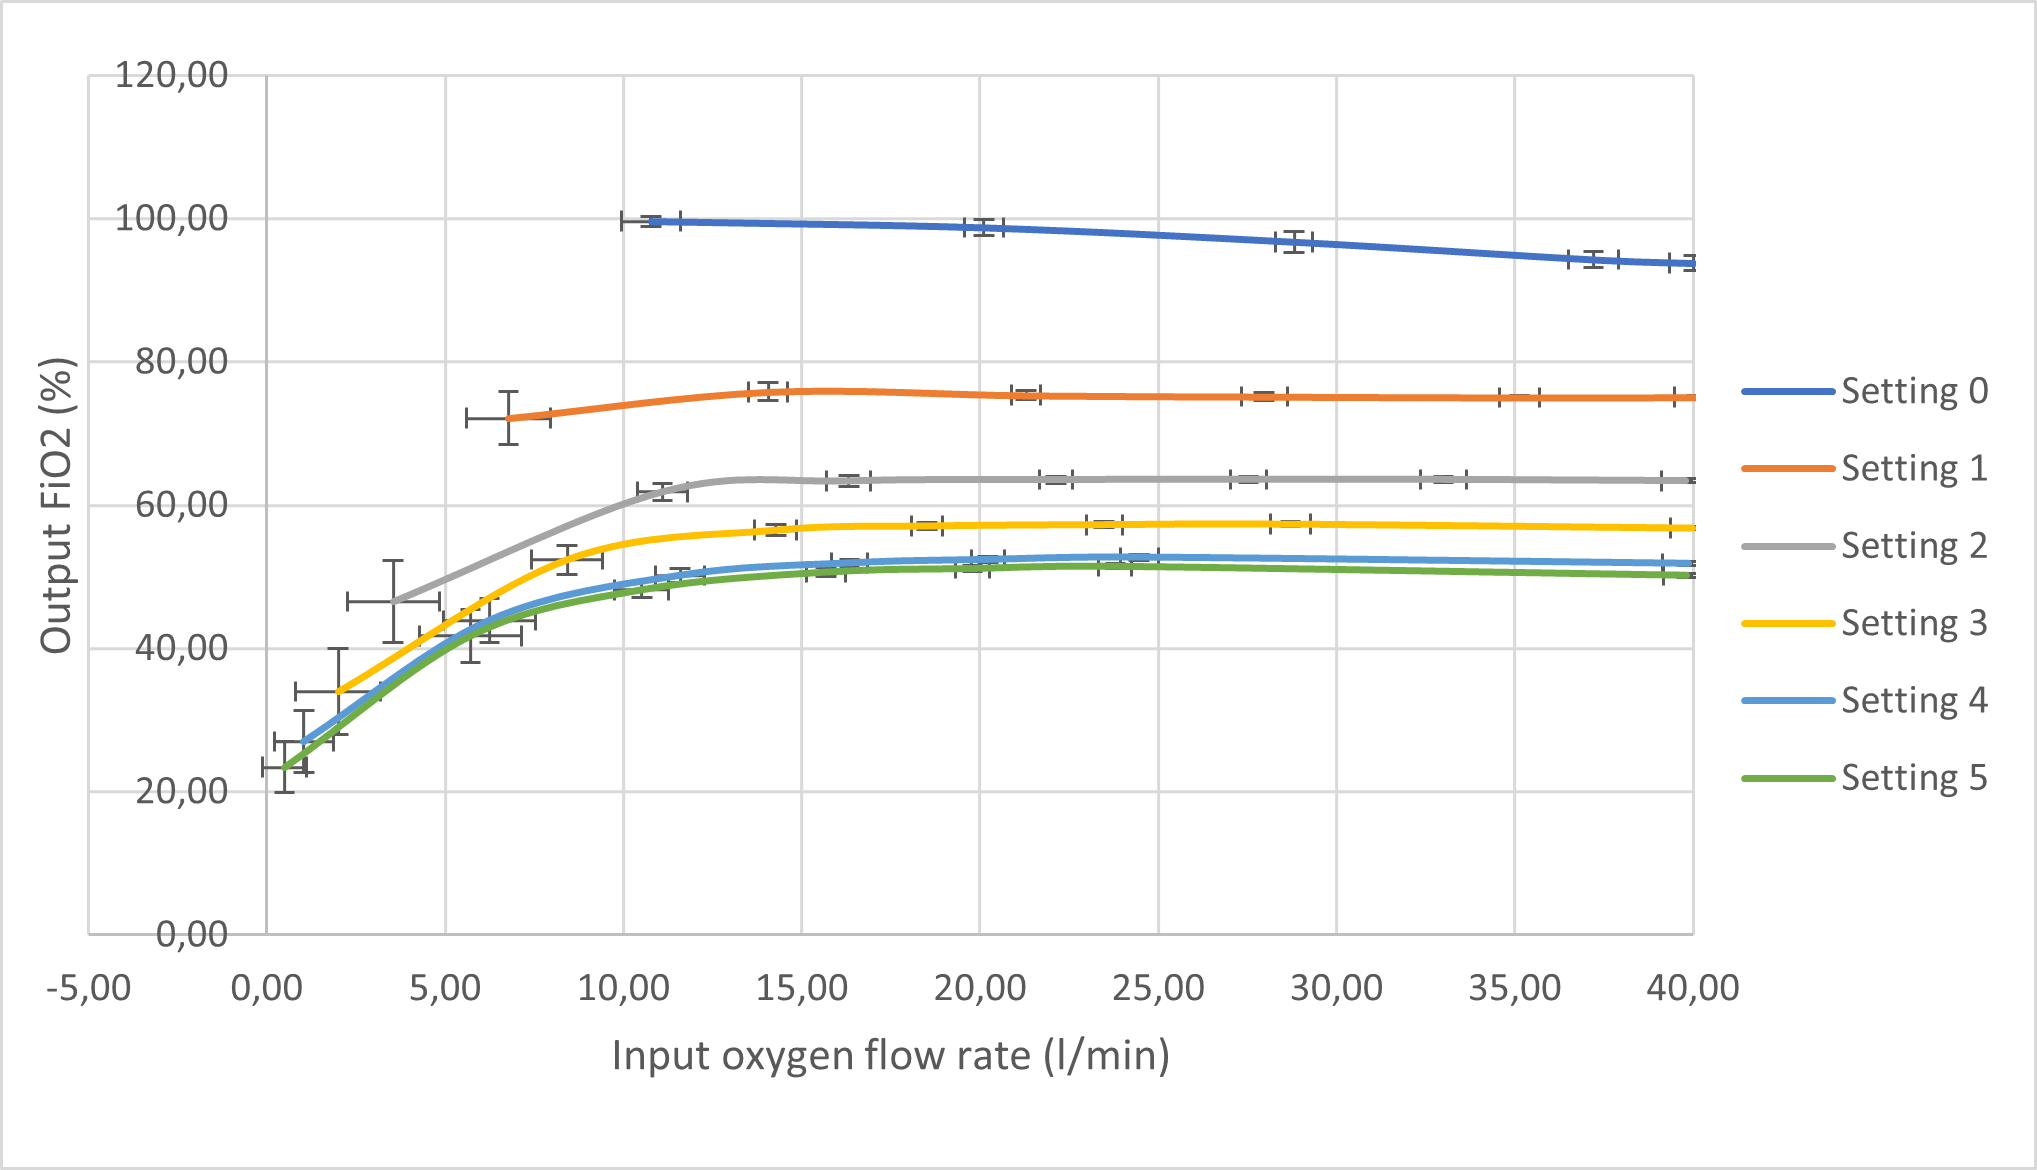 Figure 3: Mean input oxygen flow rates and output FiO<sub>2</sub> for each setting on the entrainer valve, with standard deviation error bars showing measurement precision.